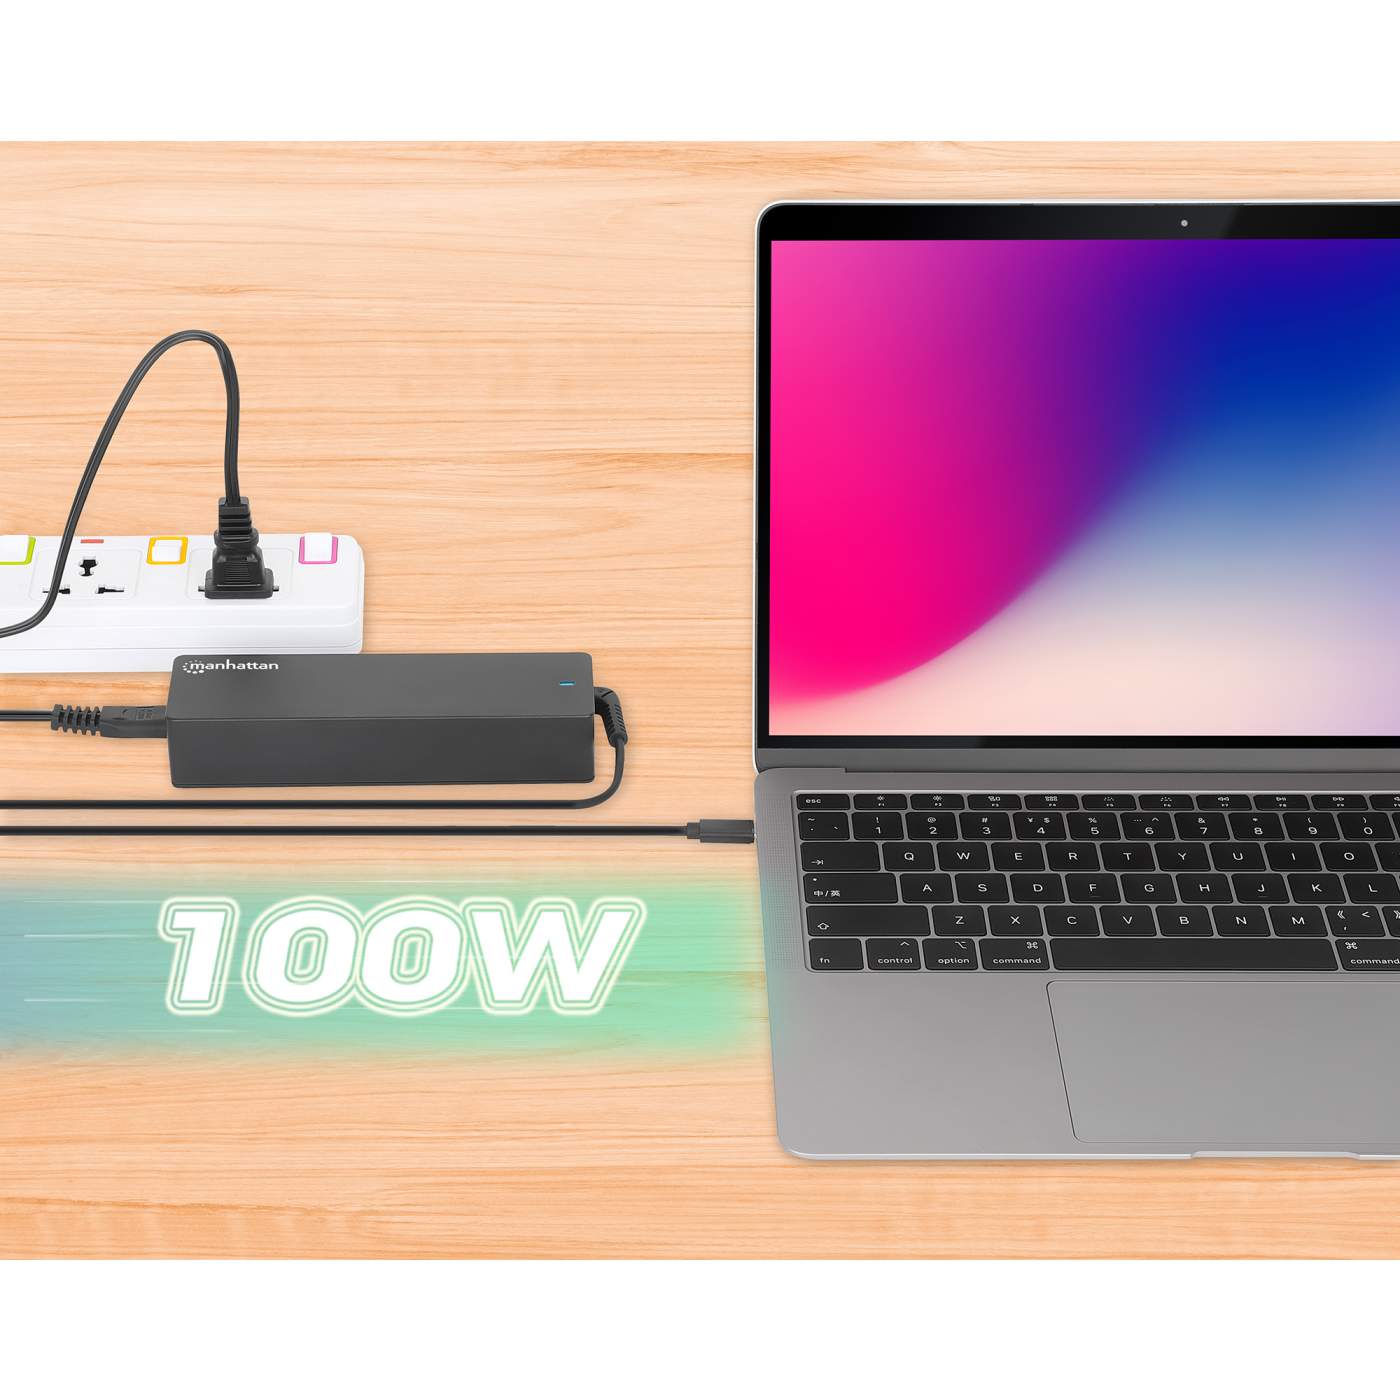 USB-C Power Delivery Laptop Charger - 100 W Image 7